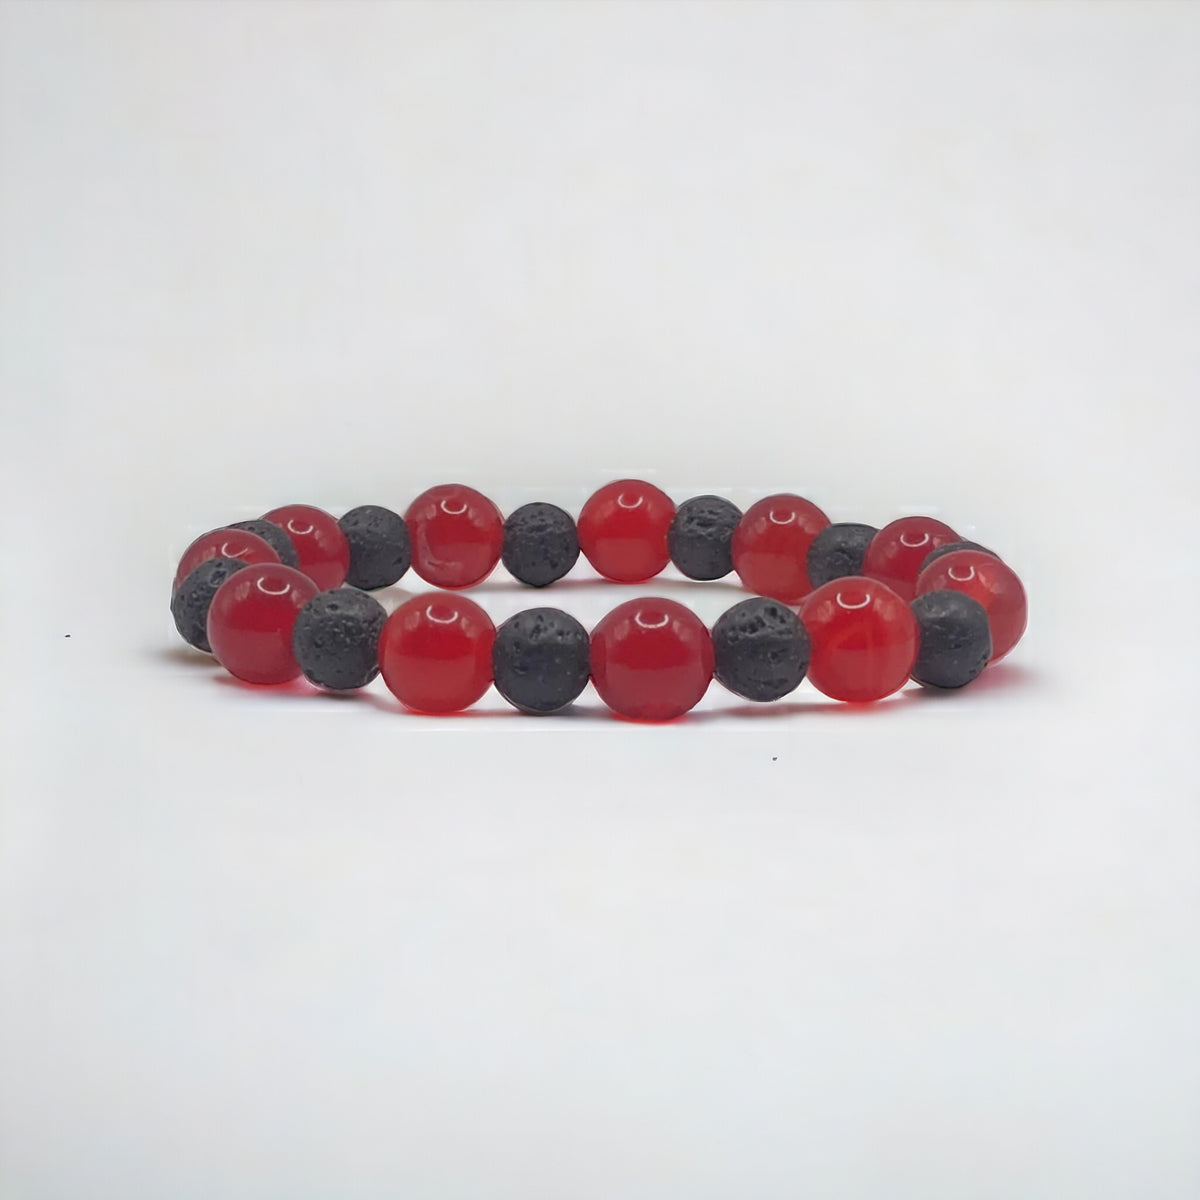 10mm Red Agate and Lava Beads Stretch Bracelet